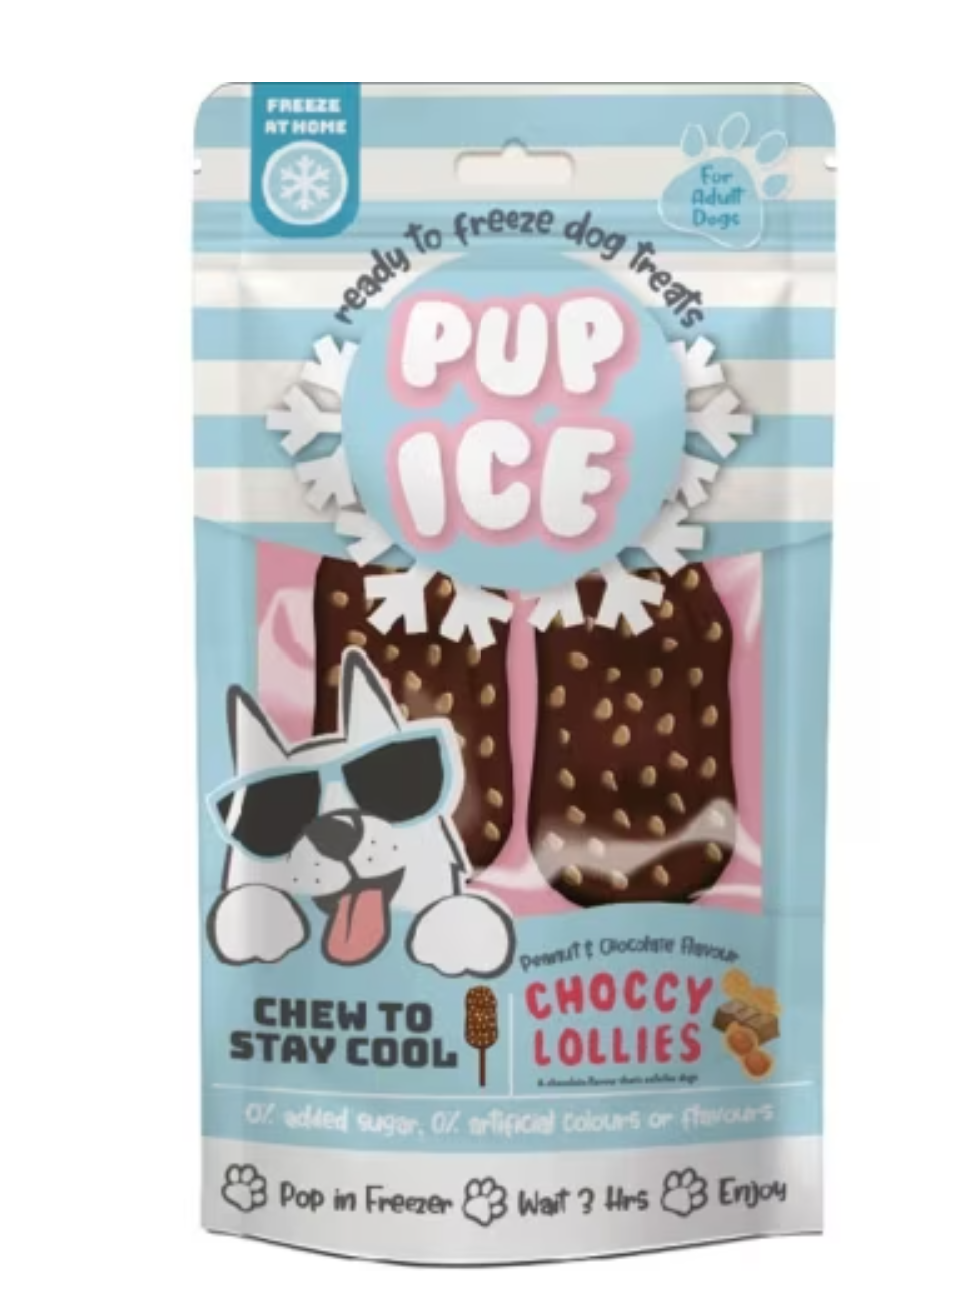 Ethical Pet Pup Ice Choccy Lollies - Peanut Butter Carob 2pk